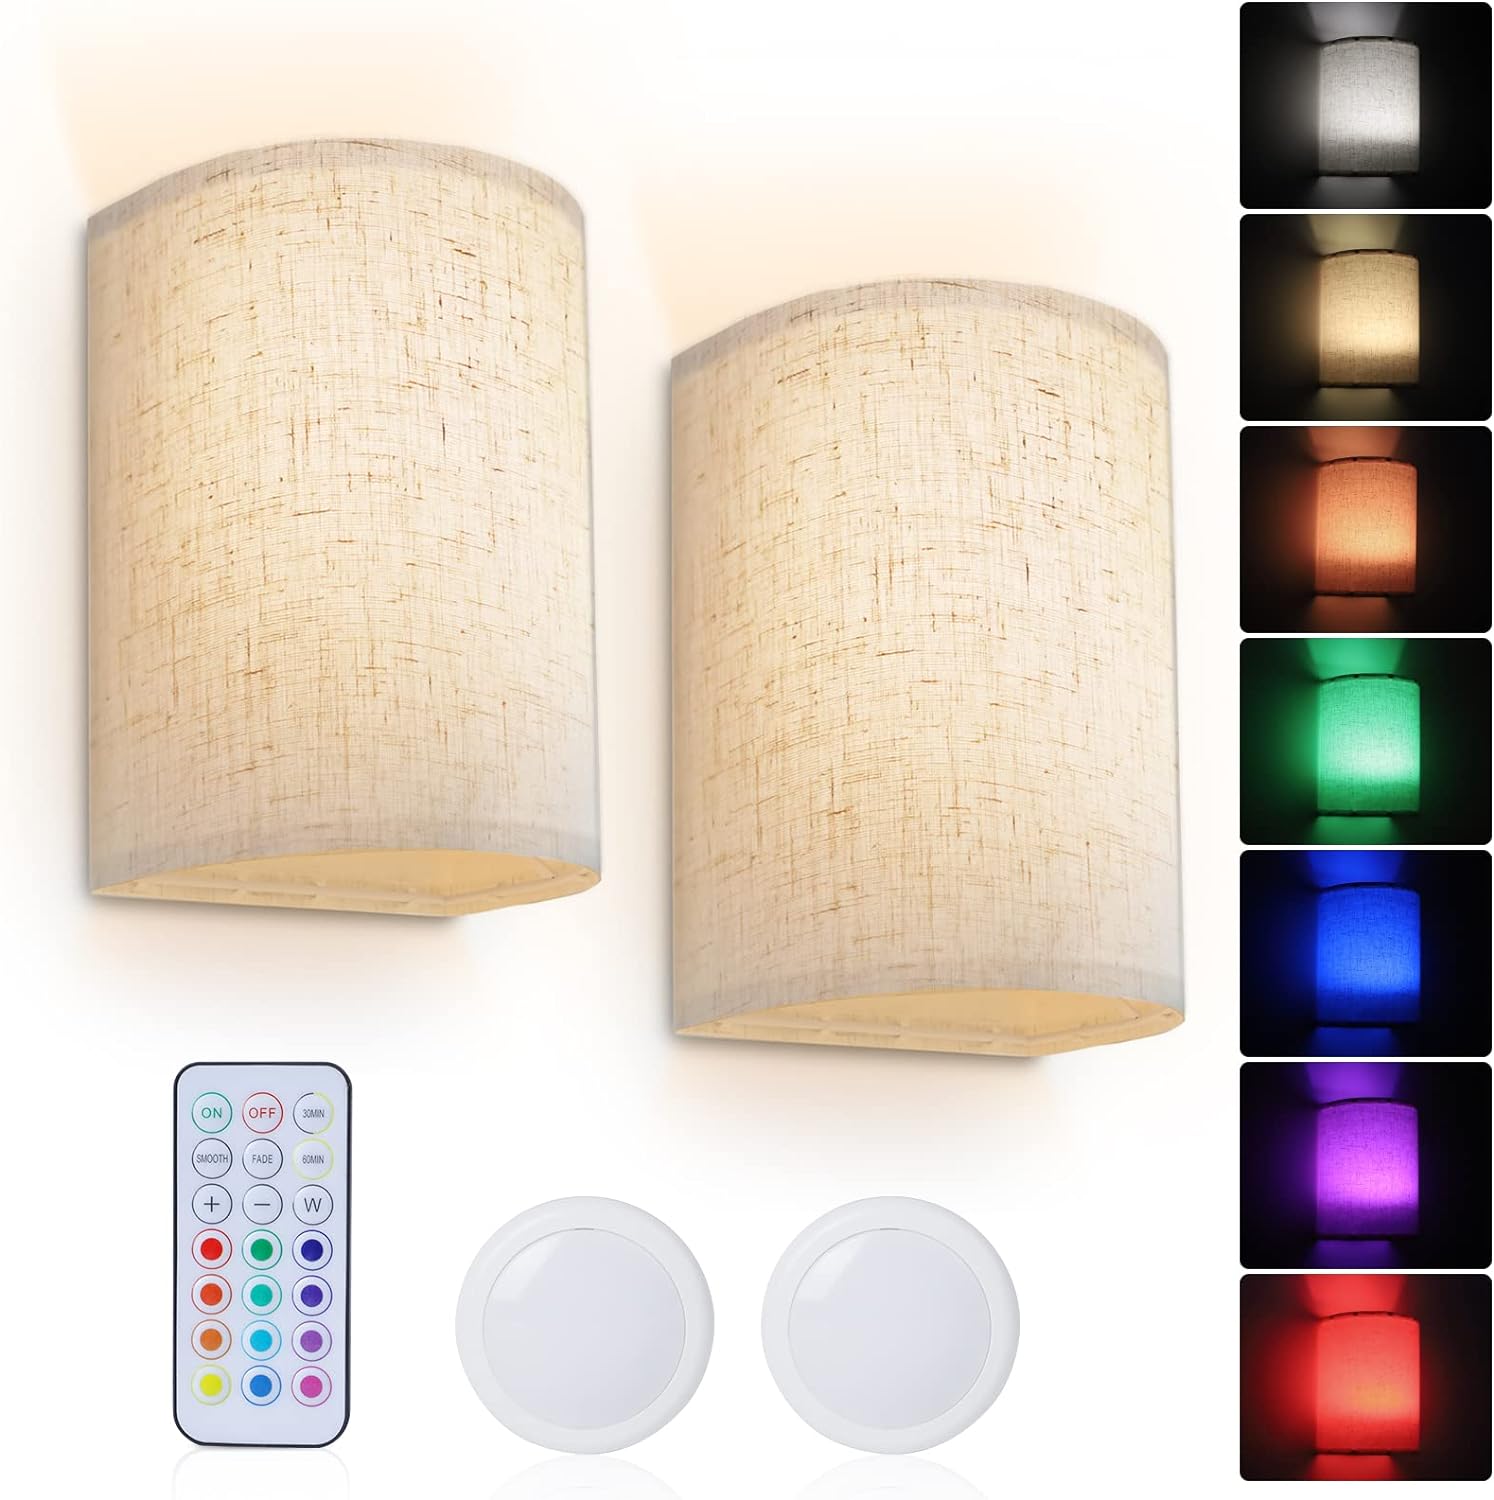 PESUTEN Wall Sconce Lighting Decor, Battery Rechargeable Wall Sconce Set of 2 with Fabric Shade Remote Control, 16 RGB Colors Changeabl